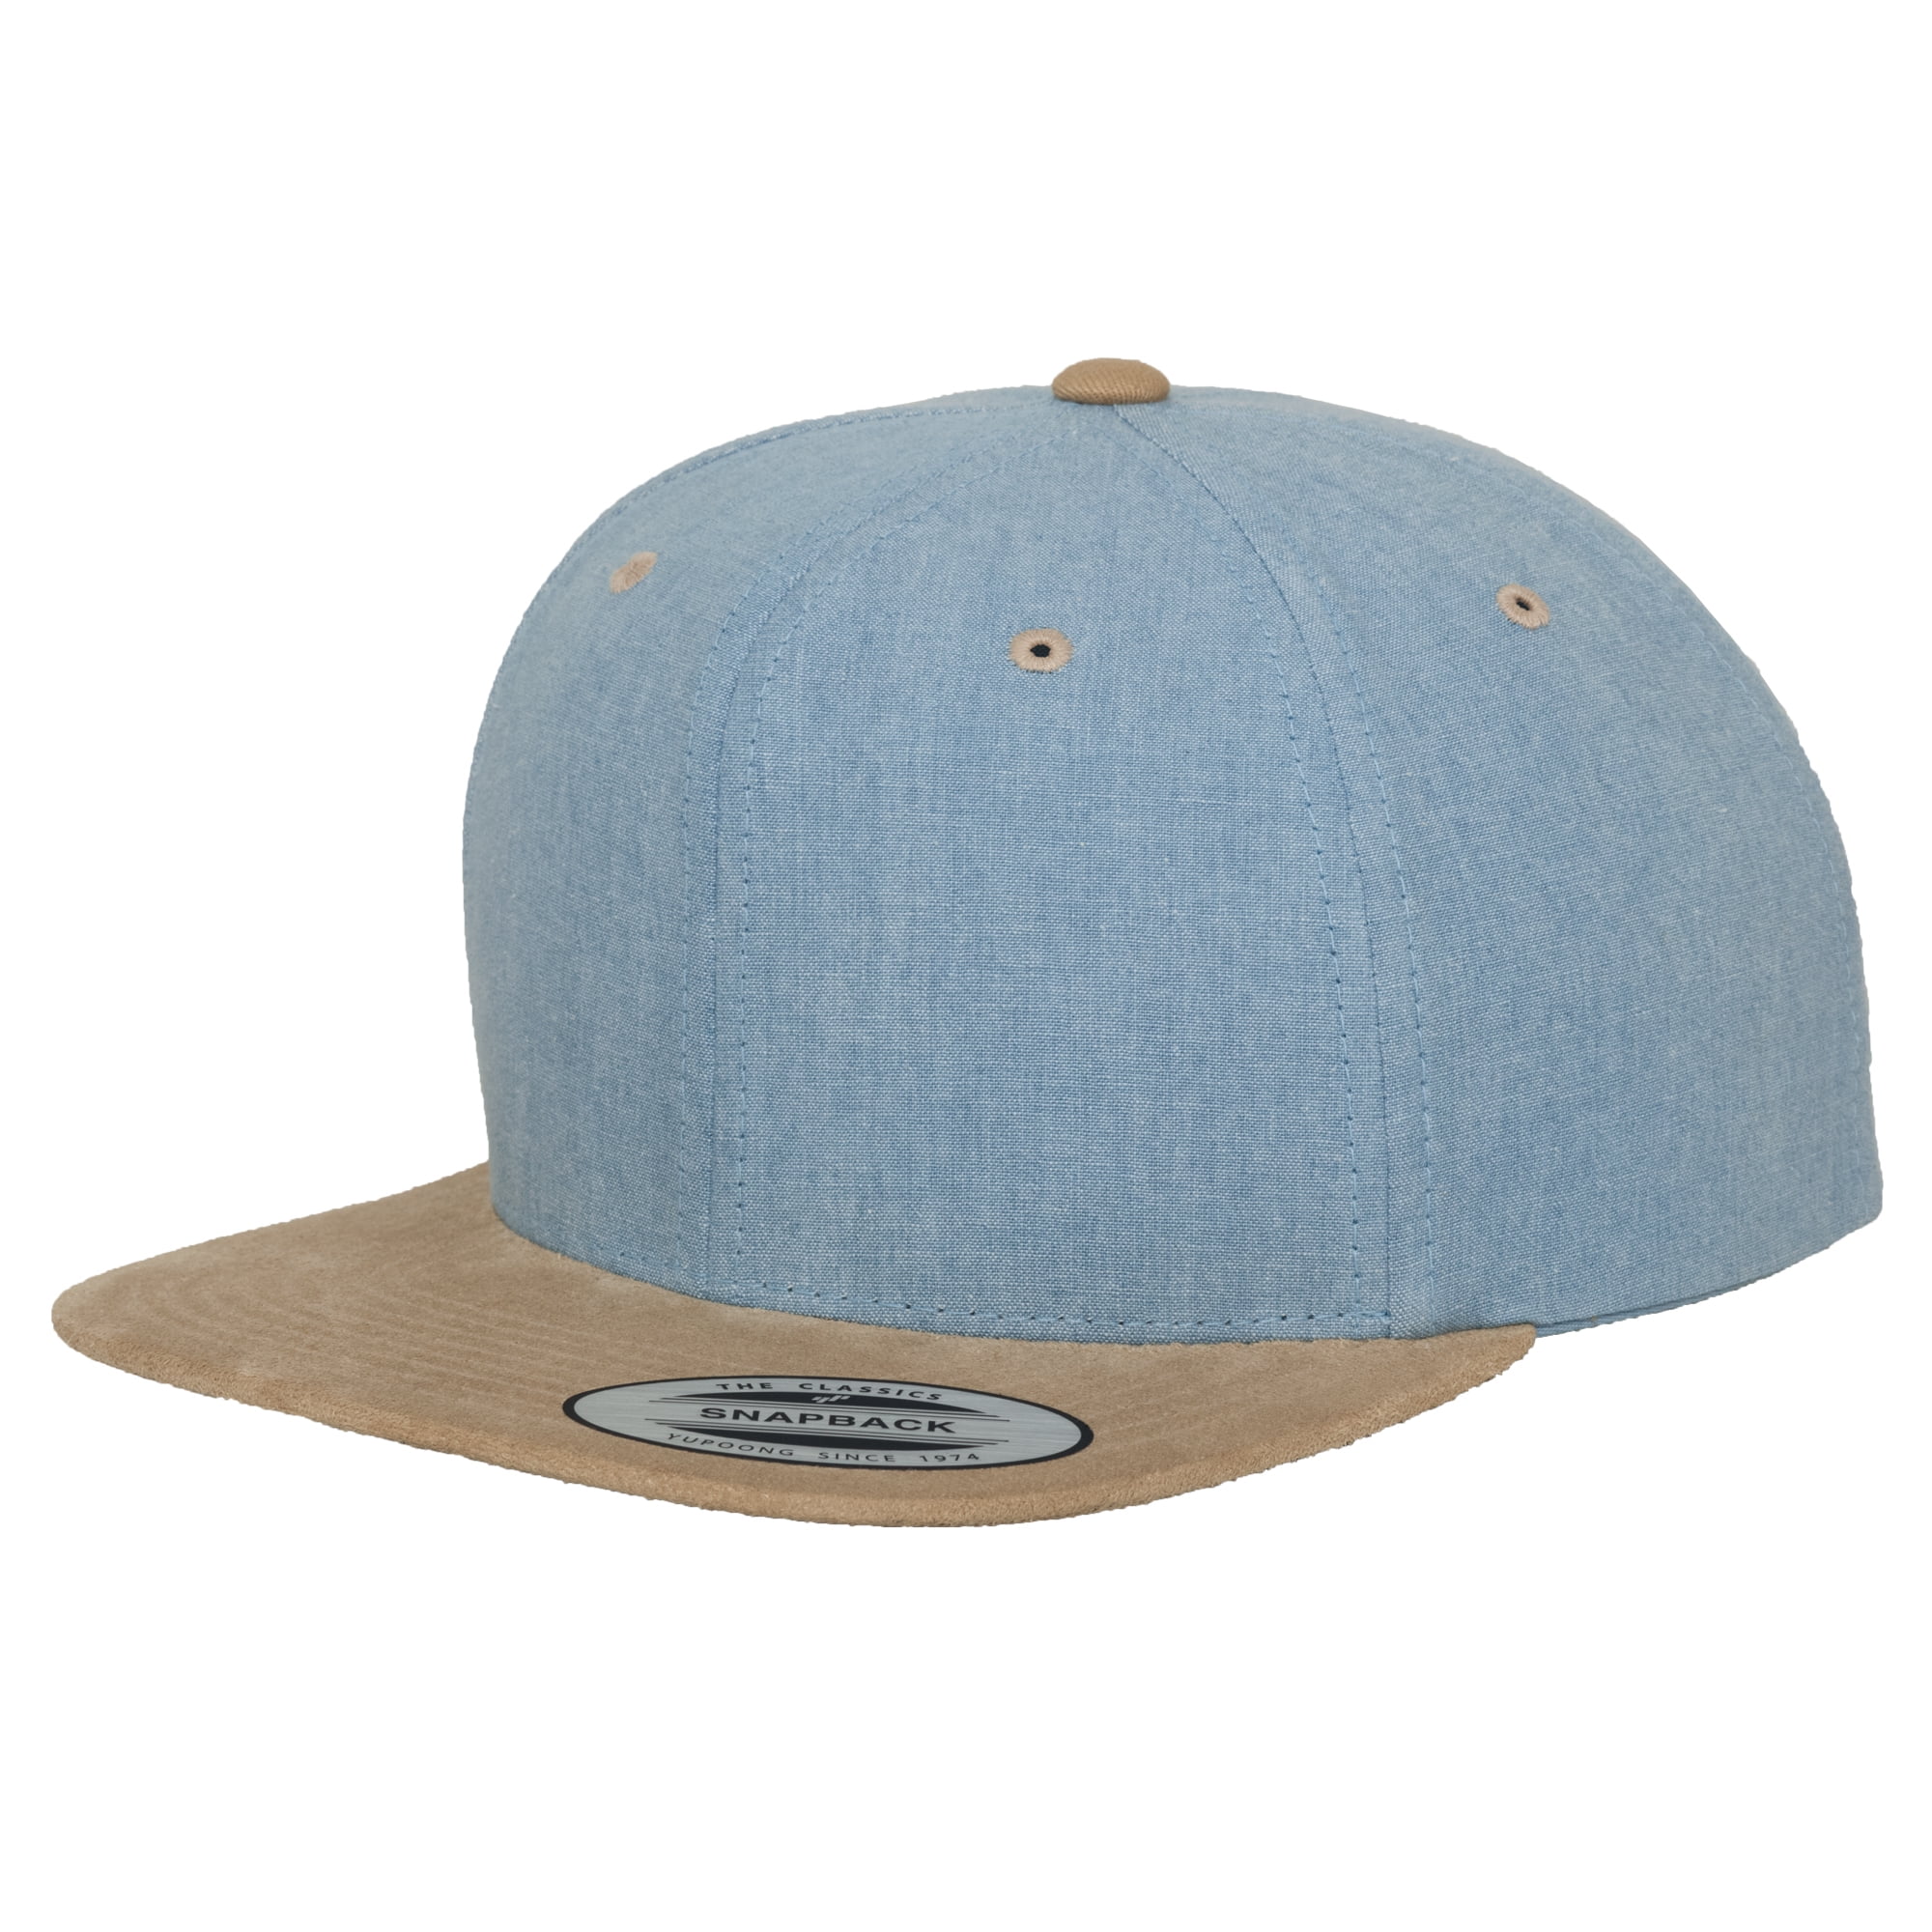 Yupoong Flexfit Chambray-Suede Snapback Cap